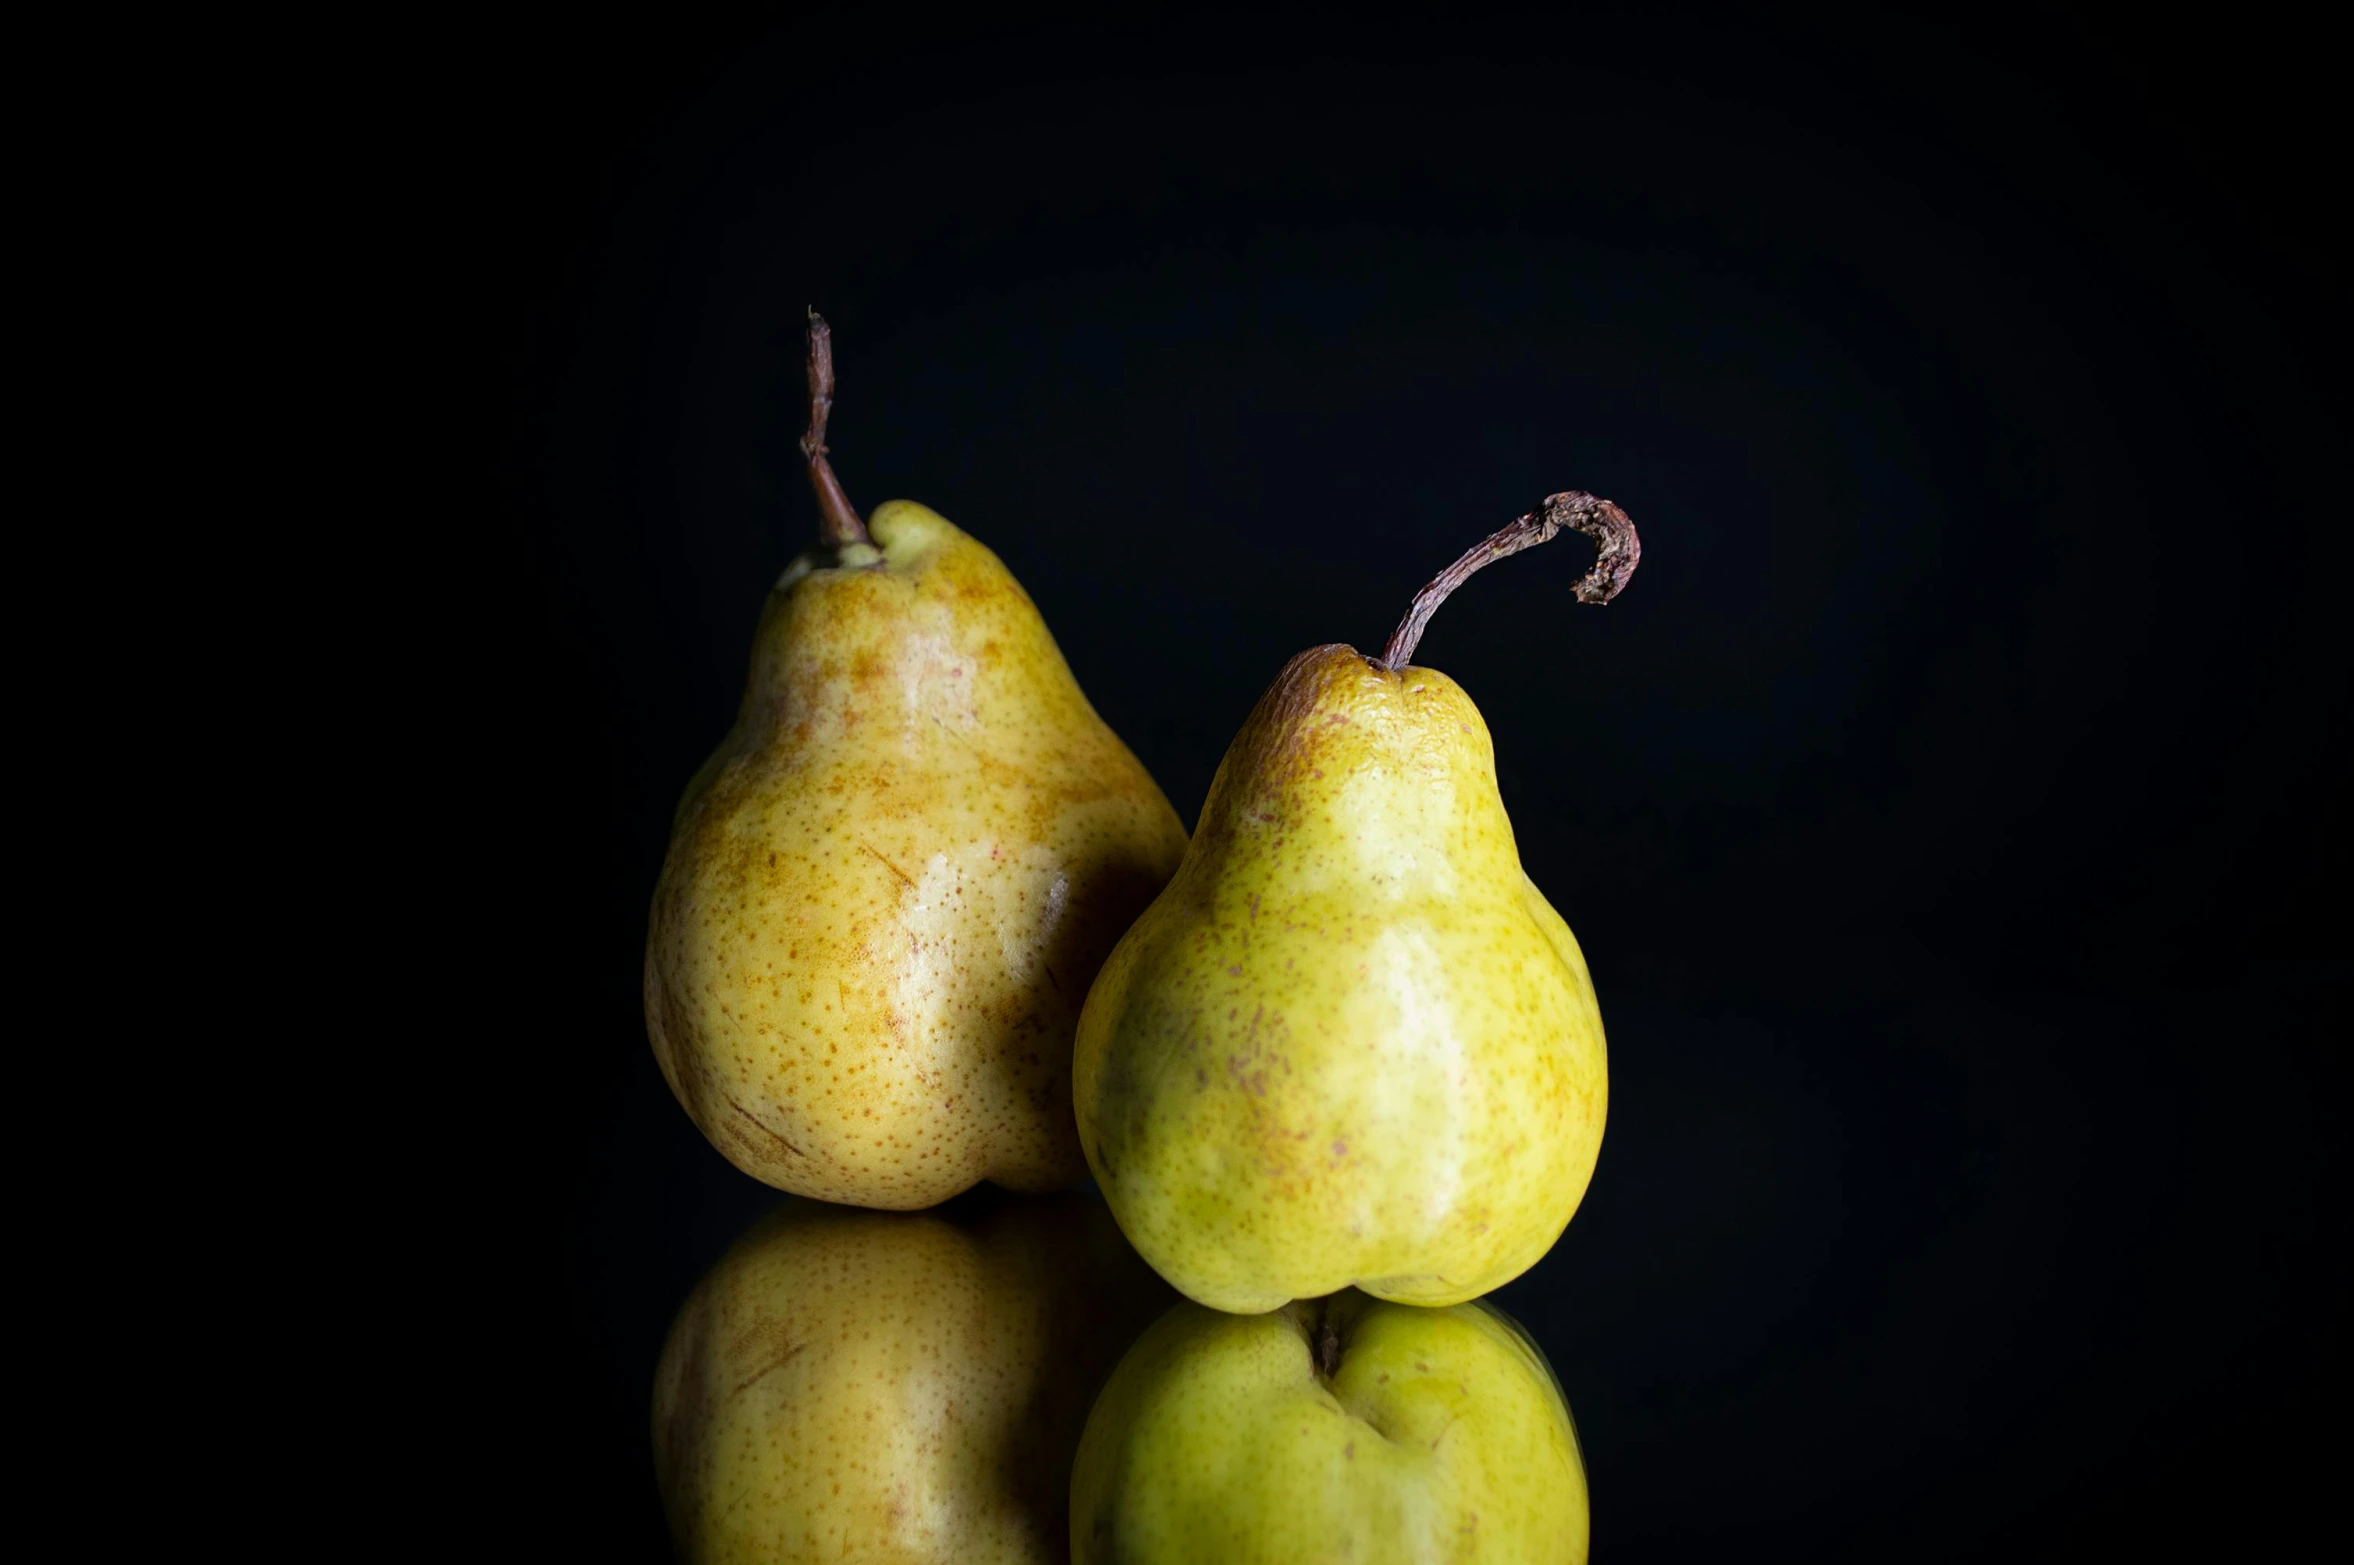 three pears in a row on reflective surface